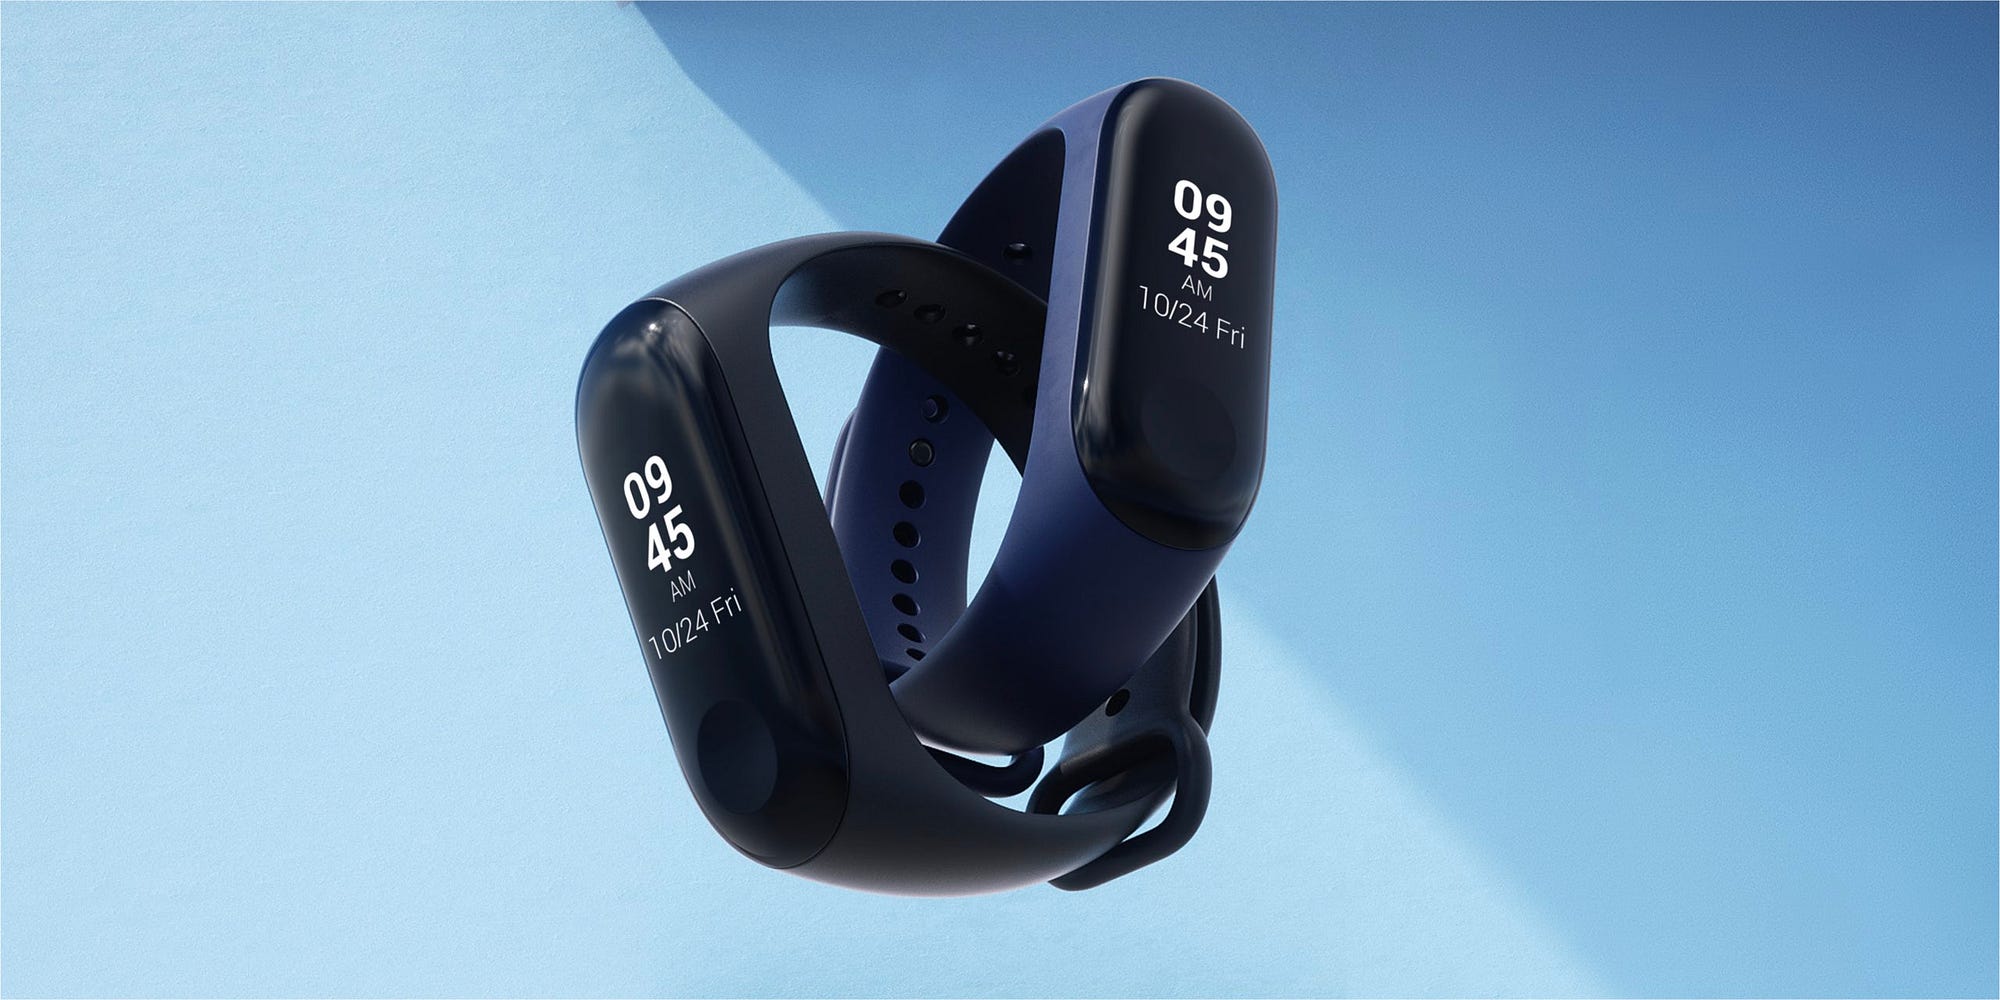 Xiaomi Mi Band 4 vs Mi Band 3: which affordable tracker is for you?